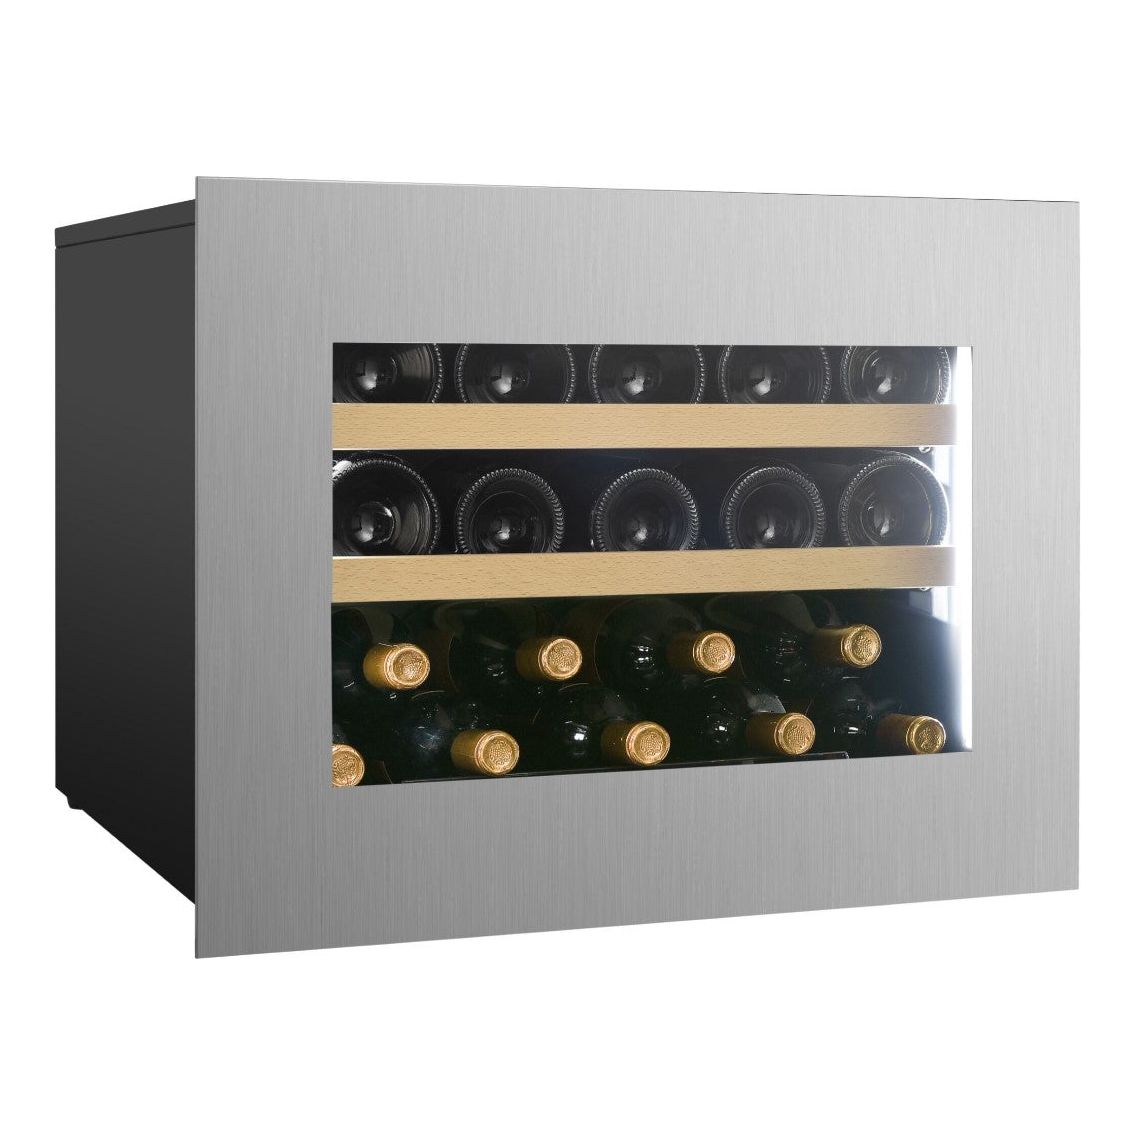 Dunavox Horizon-19.TO - Single Zone 19 Bottle - Integrated Wine Cooler - DVH-19.50SS.TO